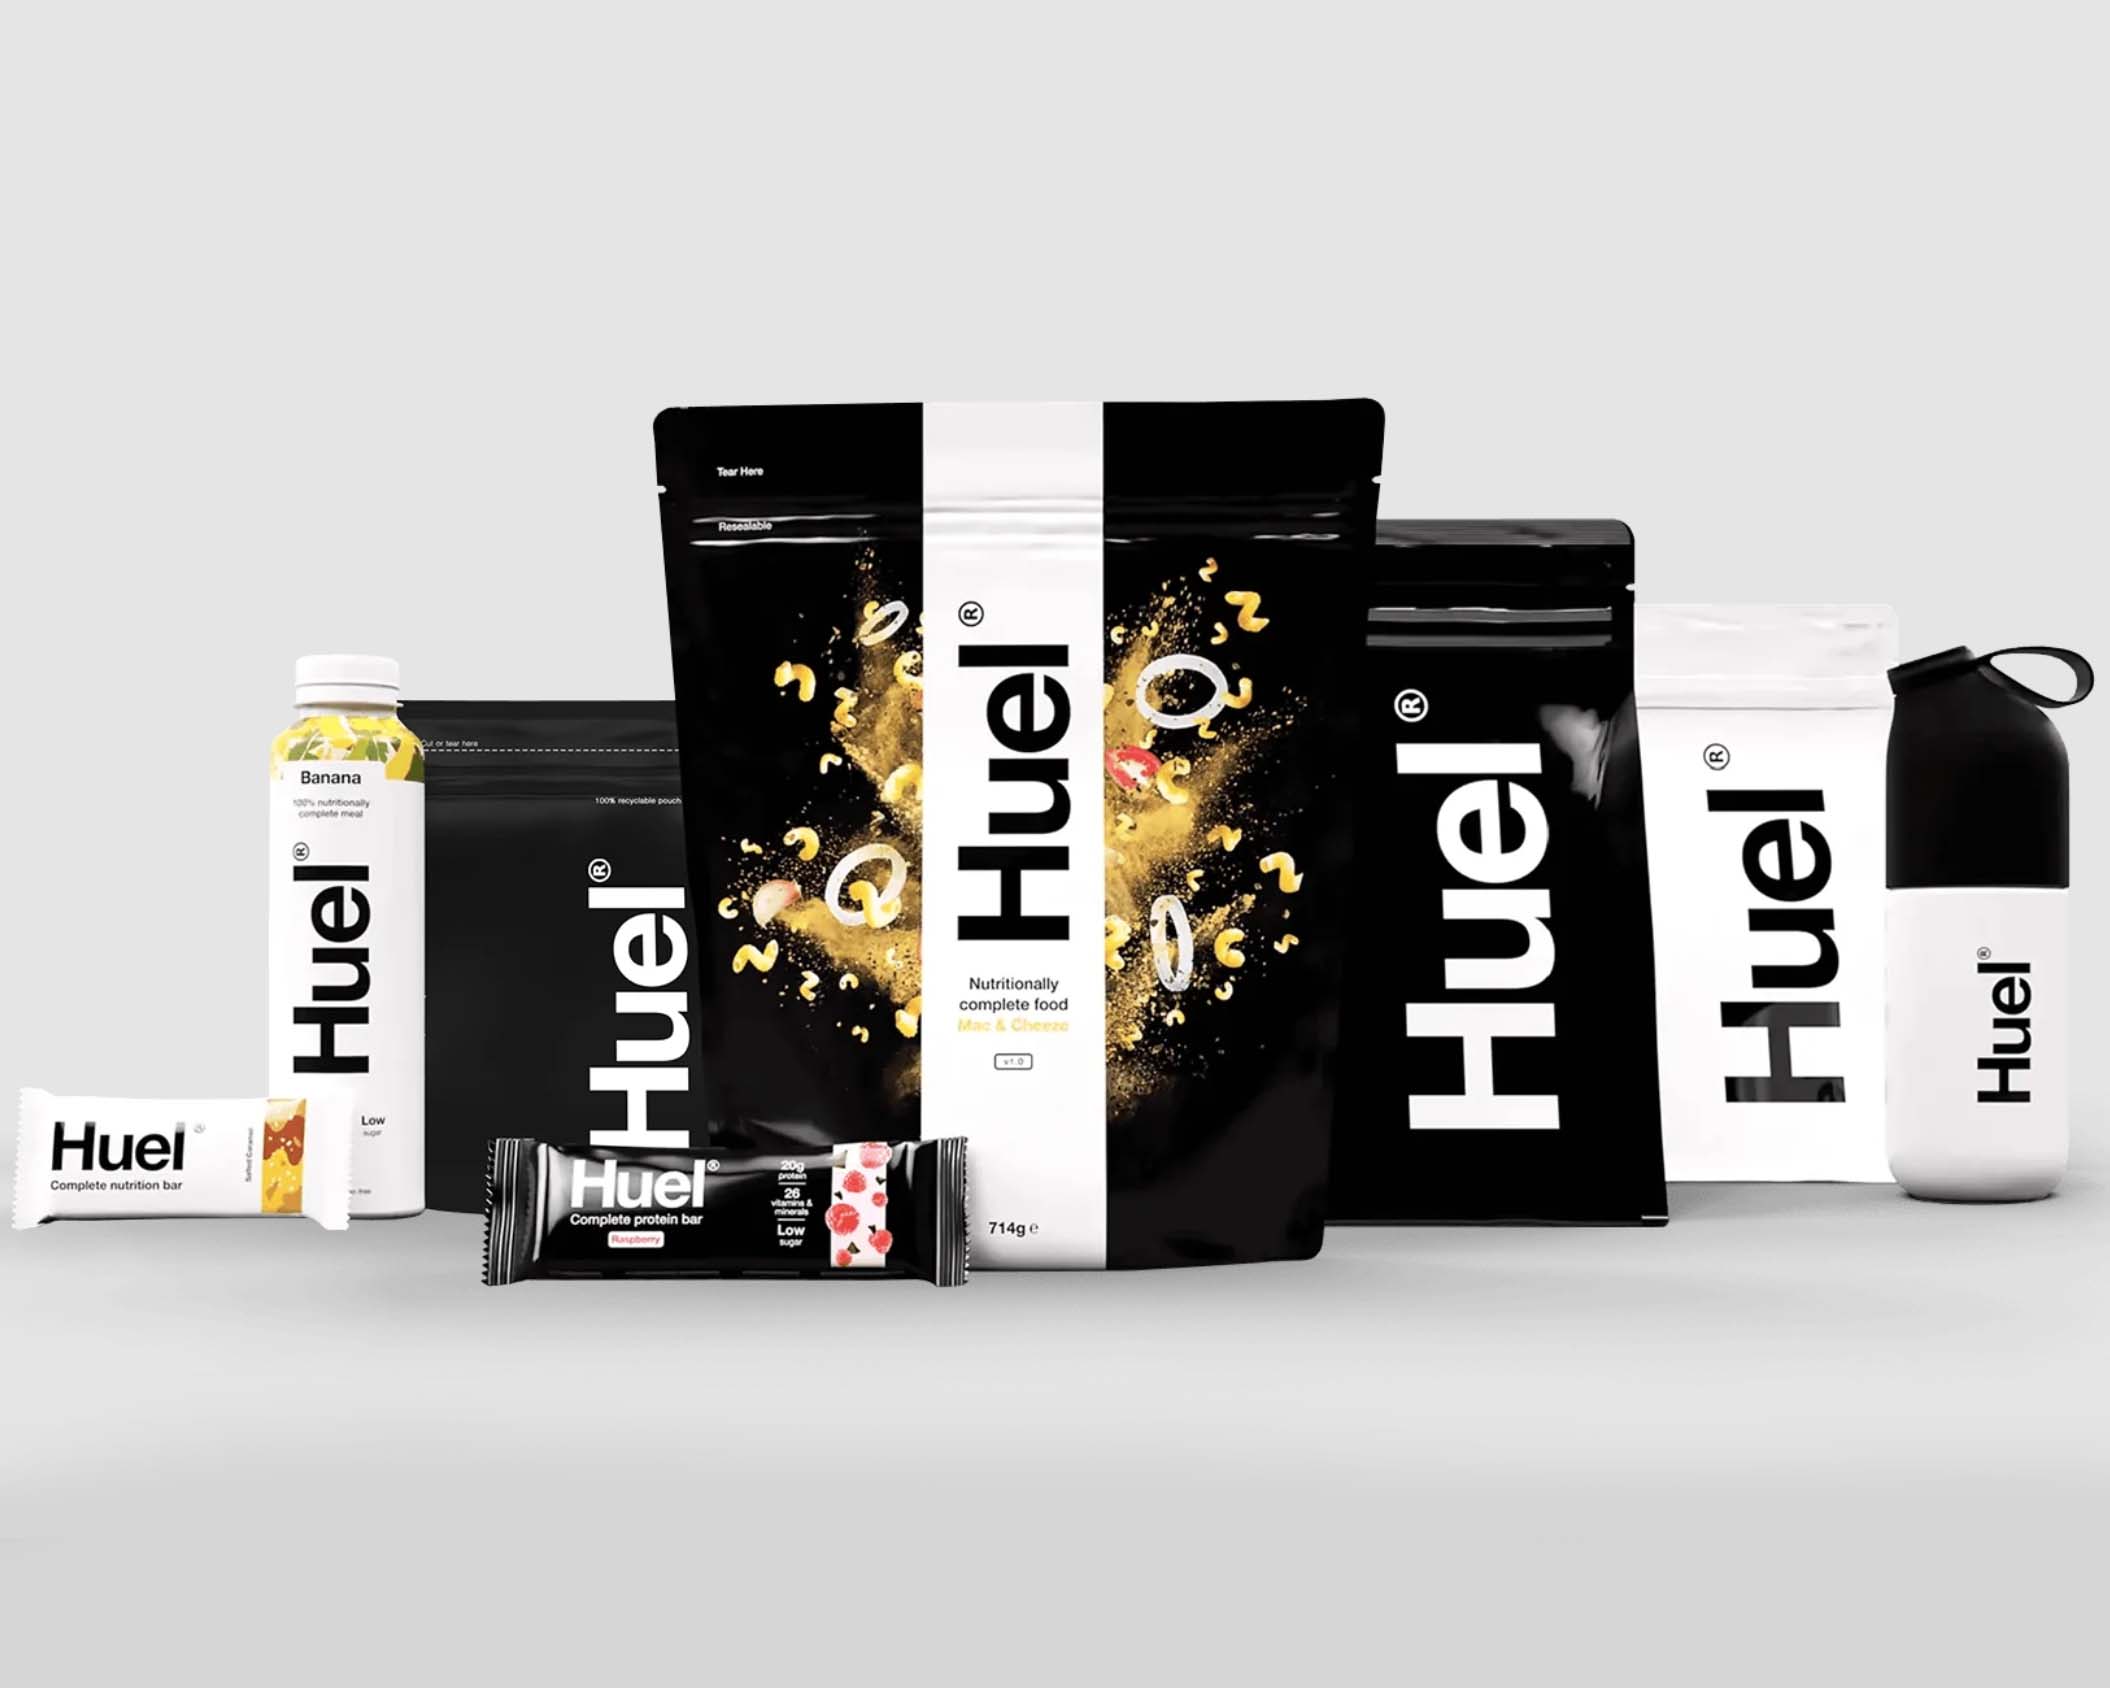 Huel Black Edition | Strawberry Shortcake 40g Vegan Protein Powder |  Nutritionally Complete Meal | 27 Vitamins and Minerals, Gluten Free | 17  Servings